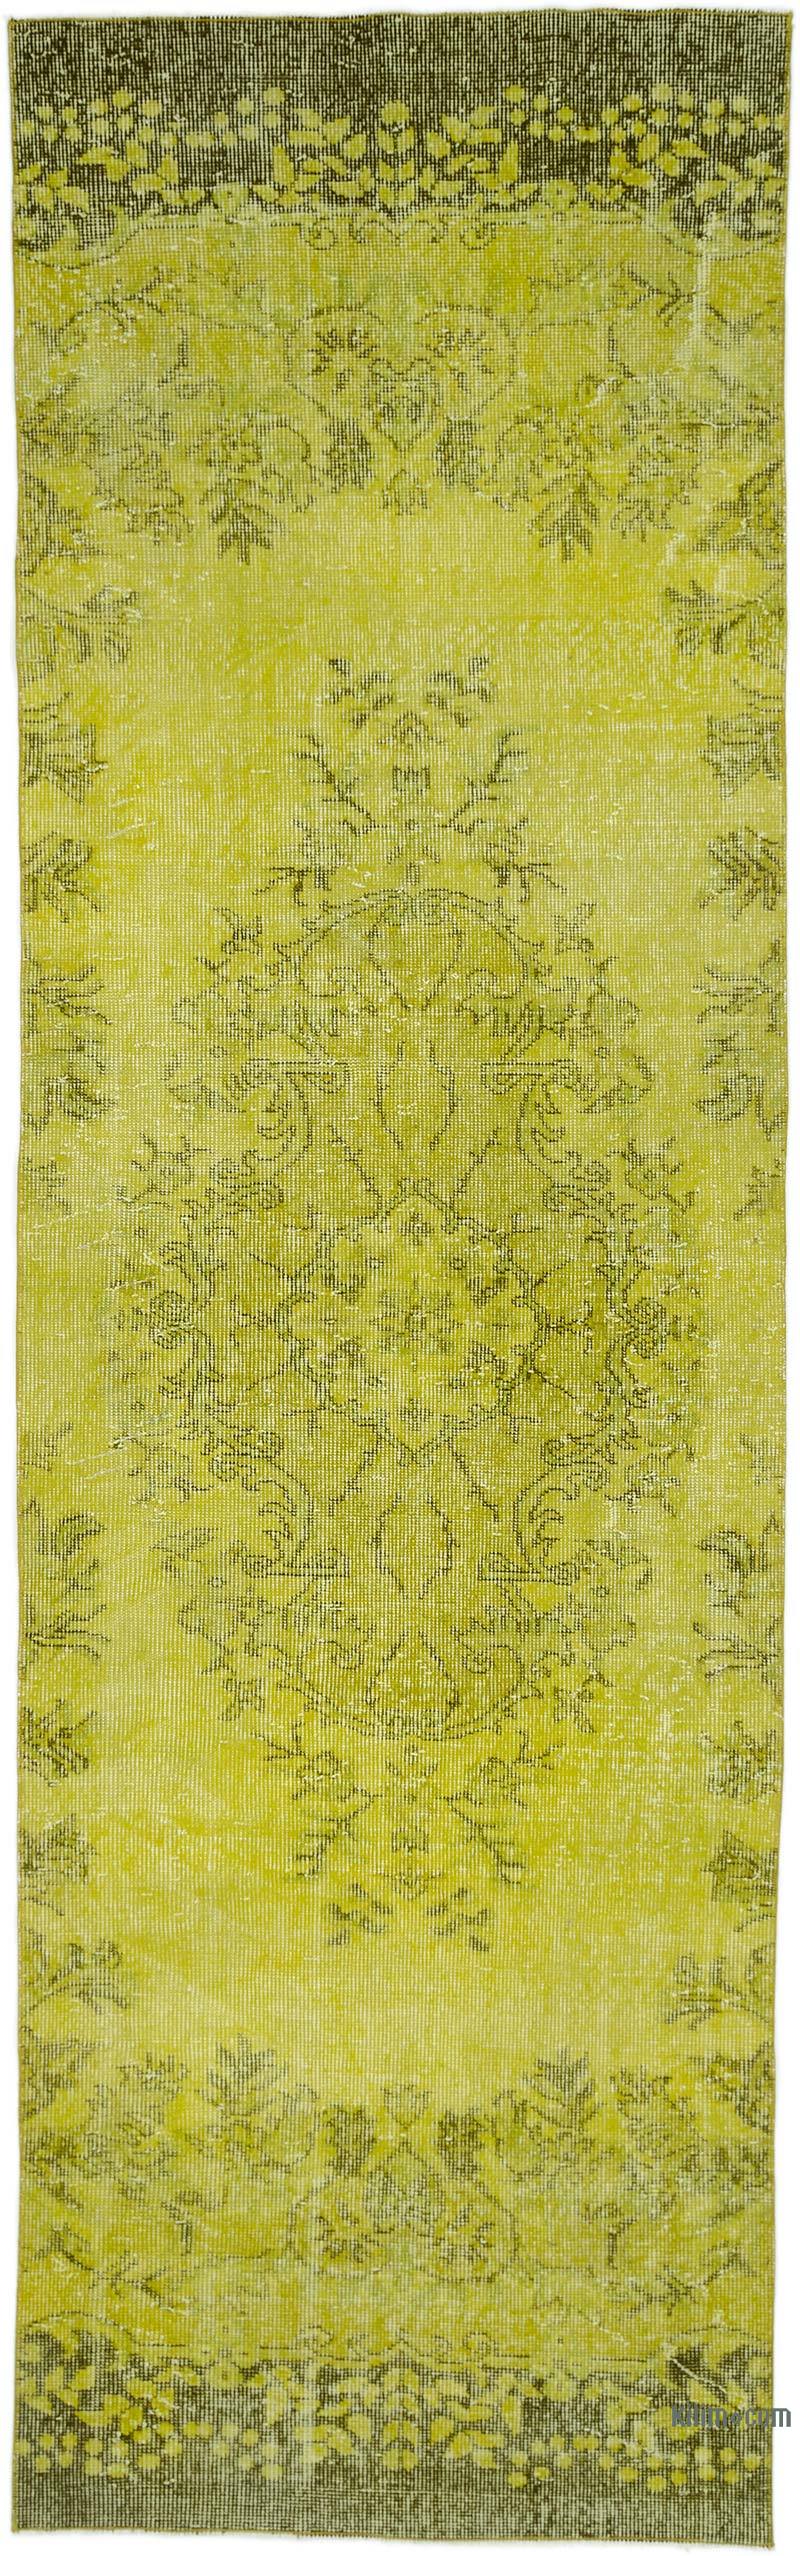 Over-dyed Turkish Vintage Runner Rug - 2' 11" x 9' 9" (35 in. x 117 in.) - K0050078